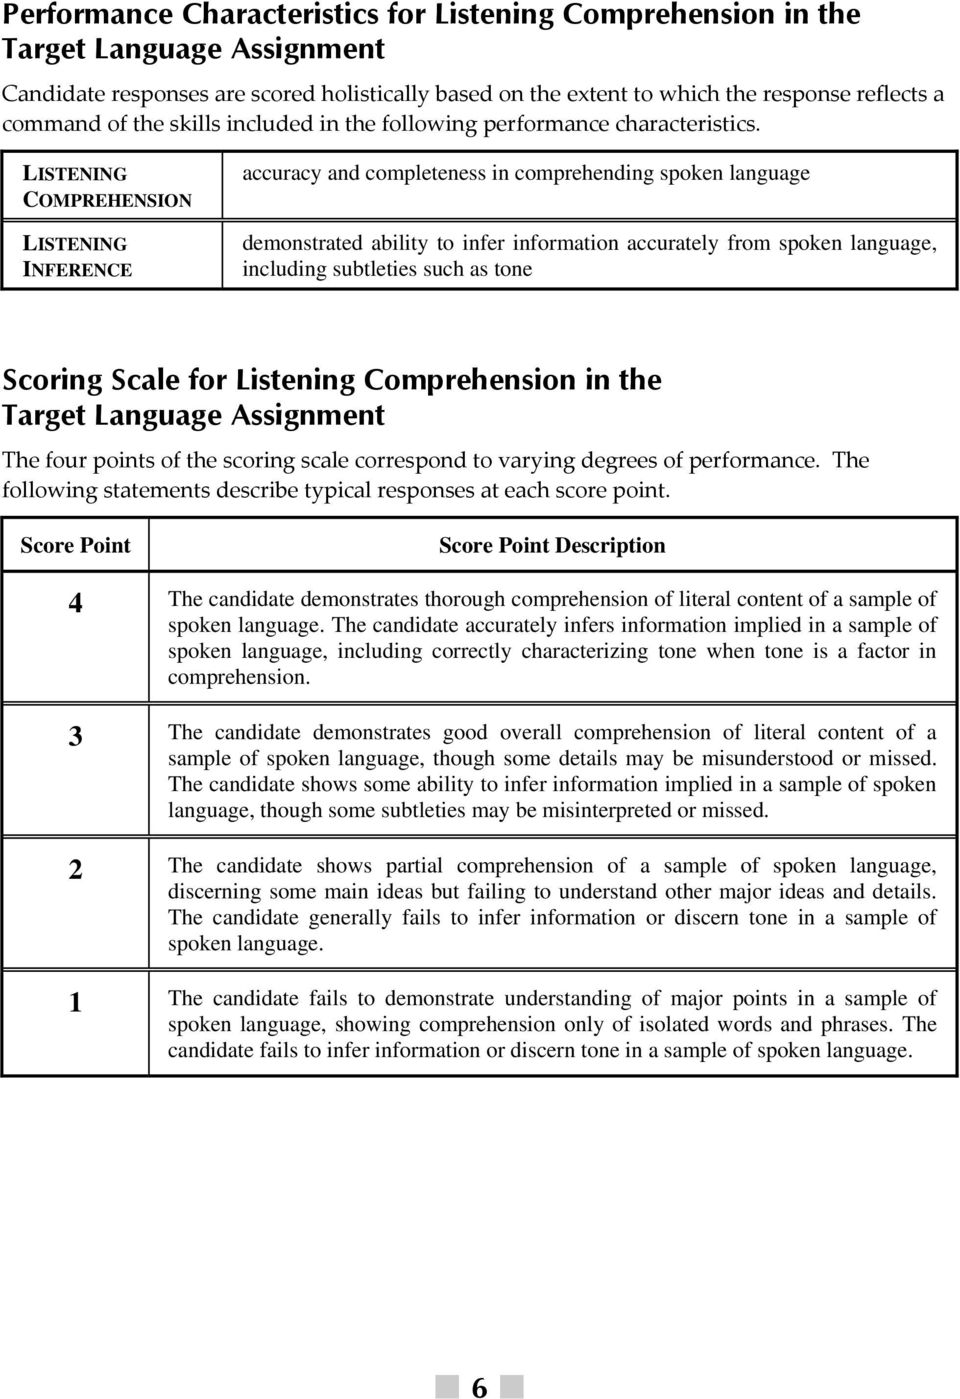 LISTENING COMPREHENSION LISTENING INFERENCE accuracy and completeness in comprehending spoken language demonstrated ability to infer information accurately from spoken language, including subtleties